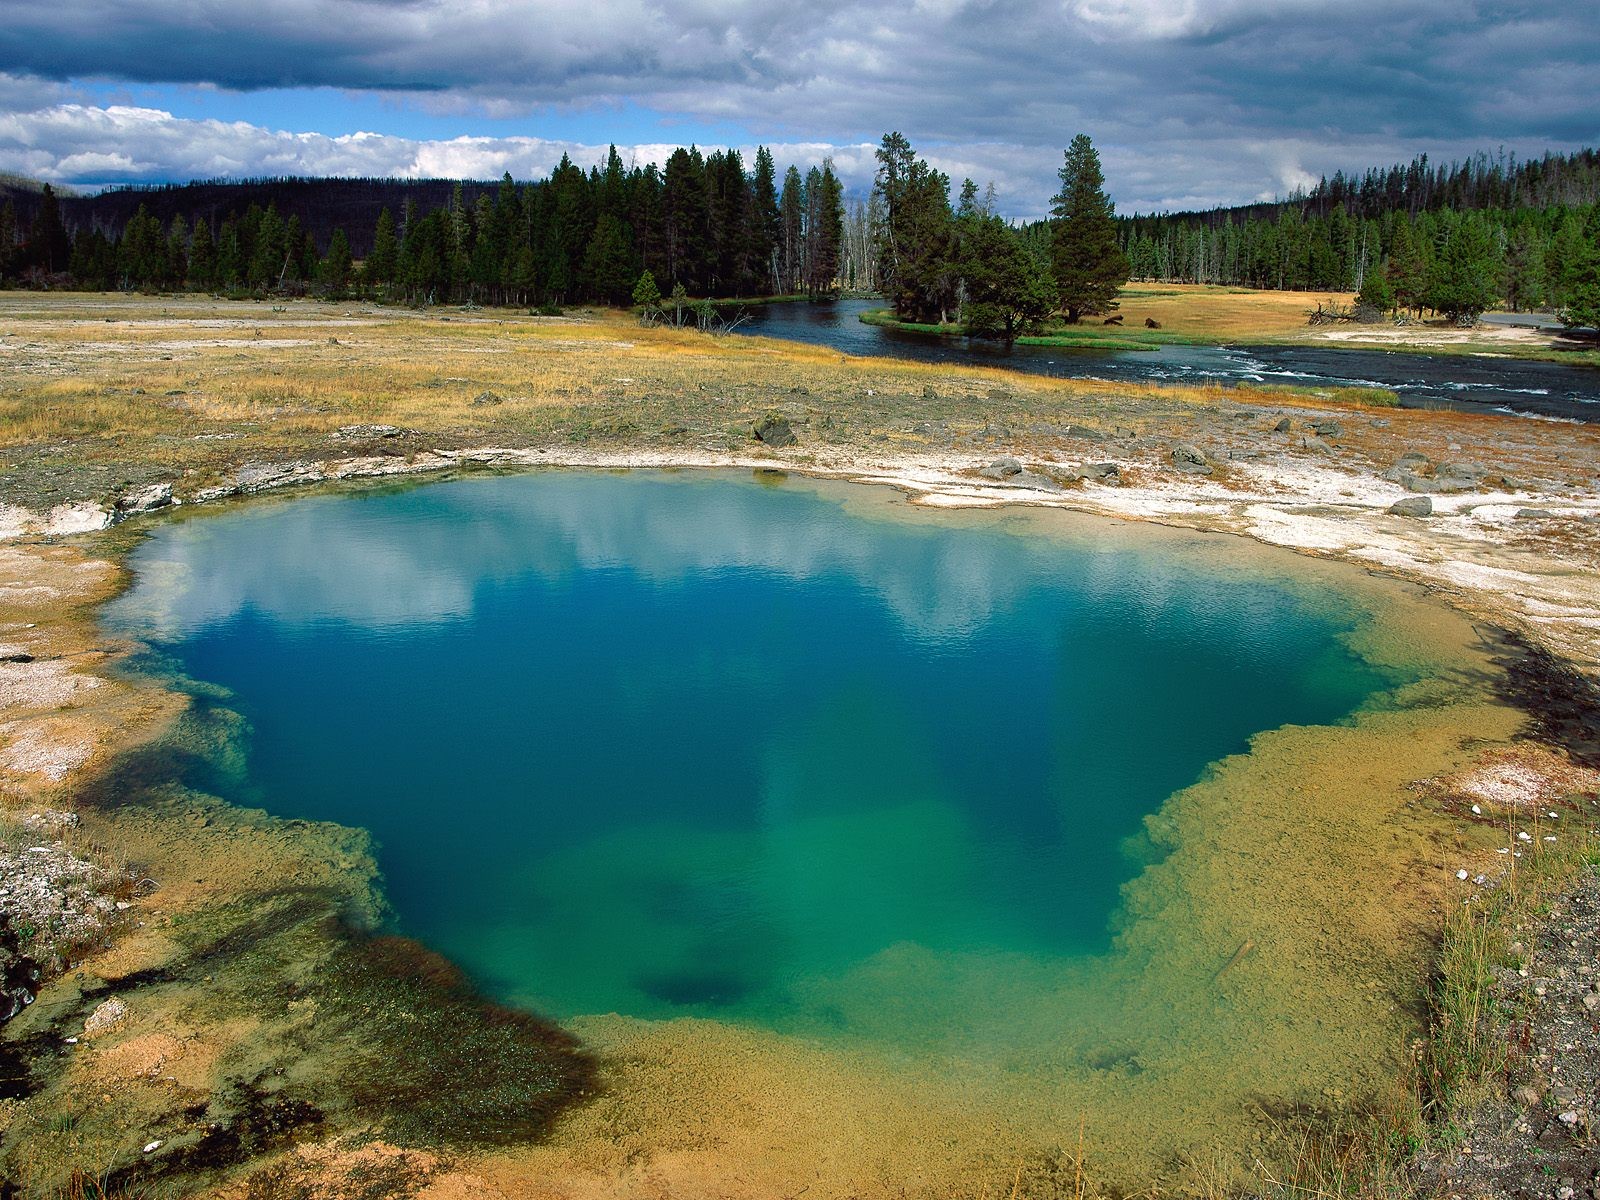 General 1600x1200 Yellowstone National Park hot spring river nature water landscape